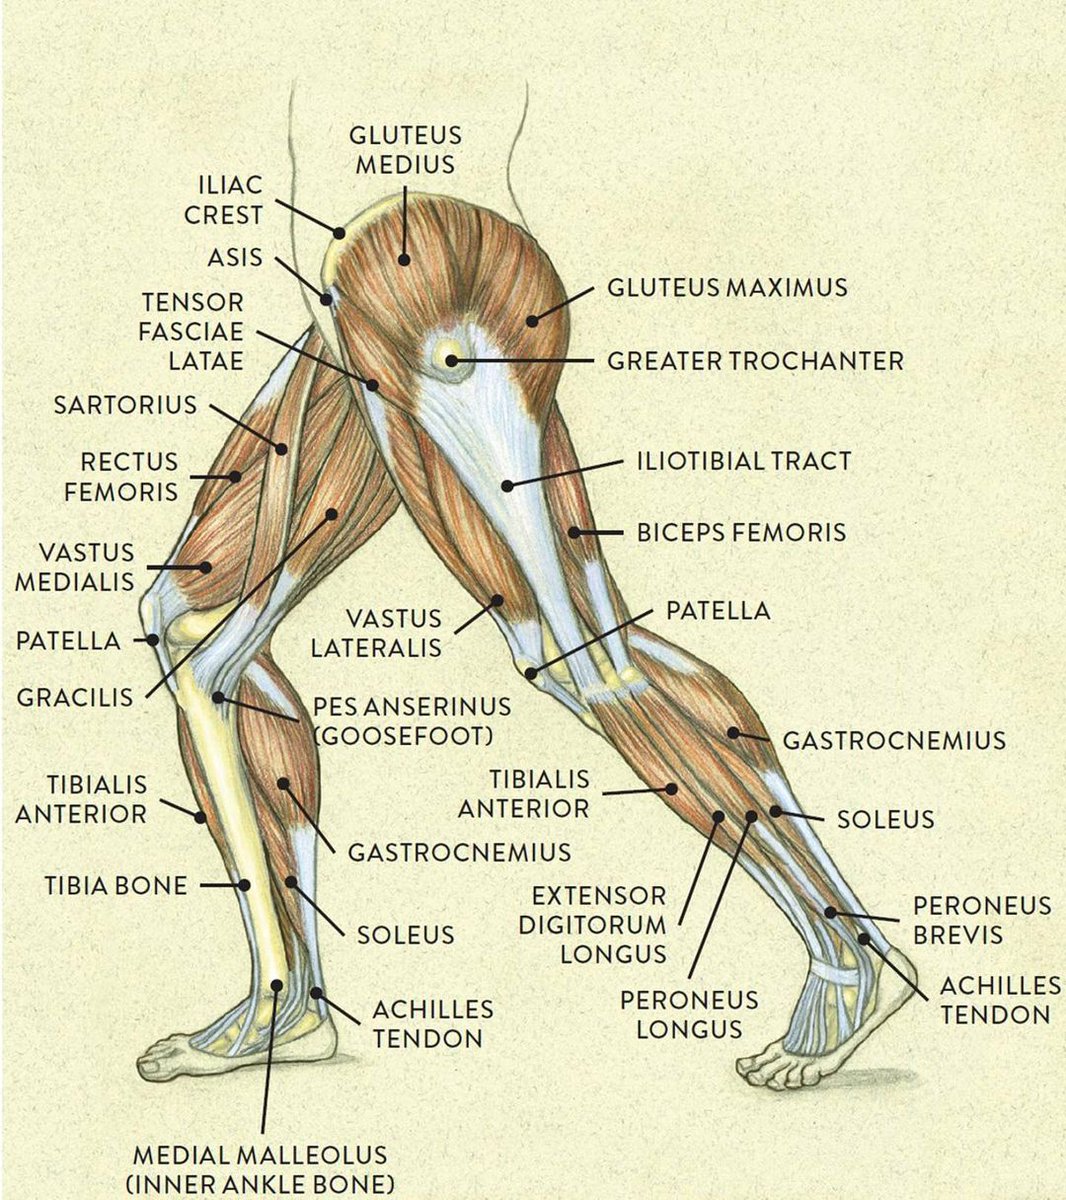 Lower limb muscles 🦵. Which is the most powerful?